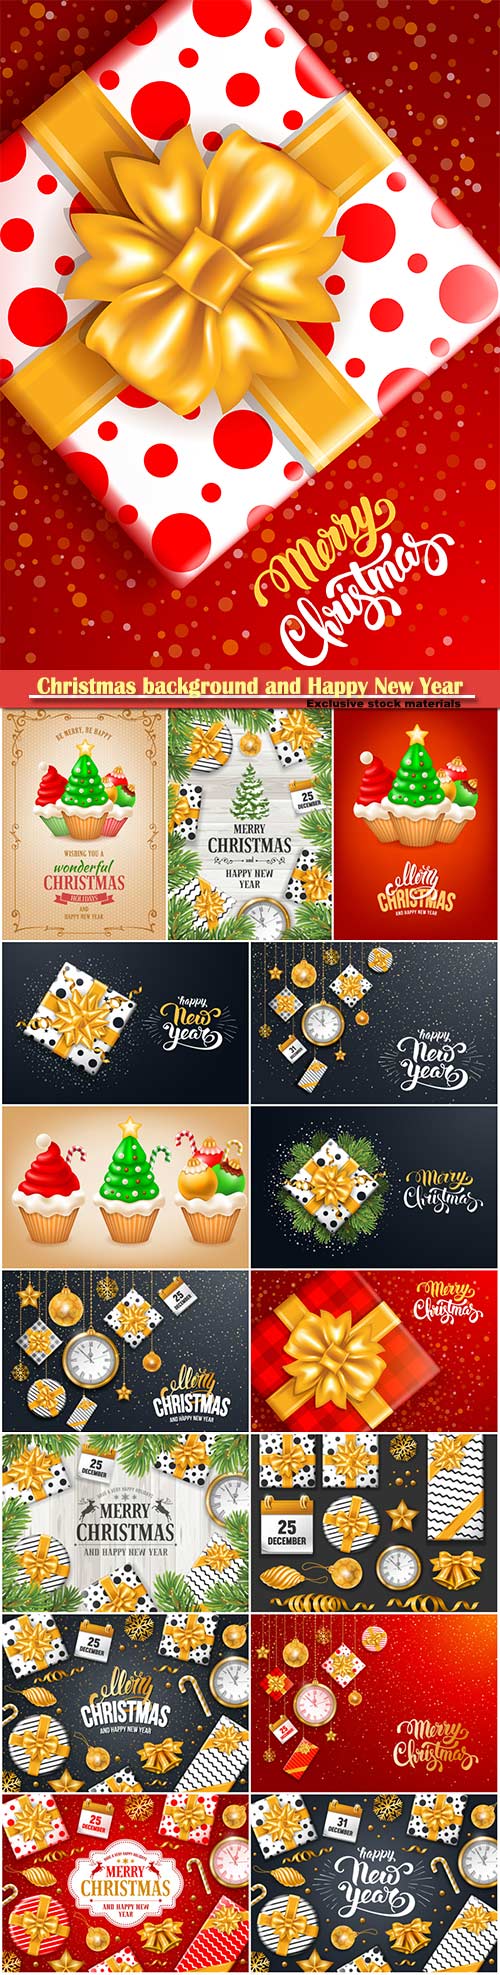 Christmas luxury background and Happy New Year vector illustration